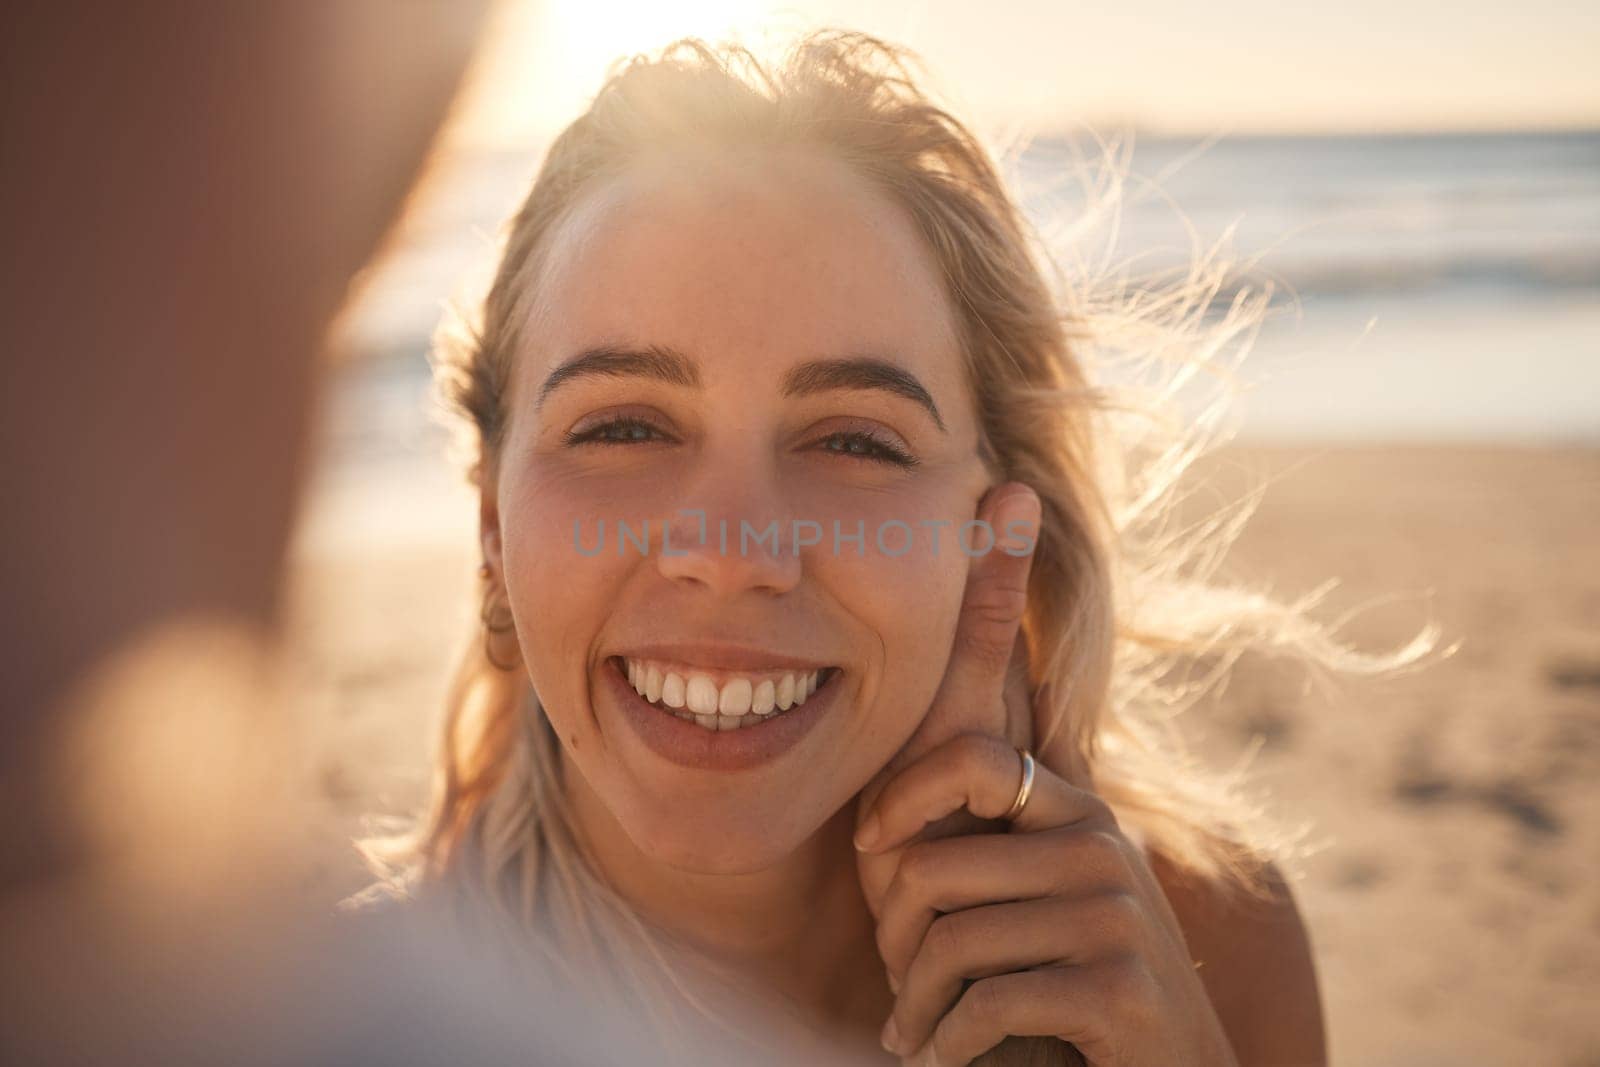 Pov, couple and love on beach holiday, vacation or summer date outdoors. Portrait, romance and smile of man and woman with affection, having fun and enjoying quality time together on sandy seashore. by YuriArcurs